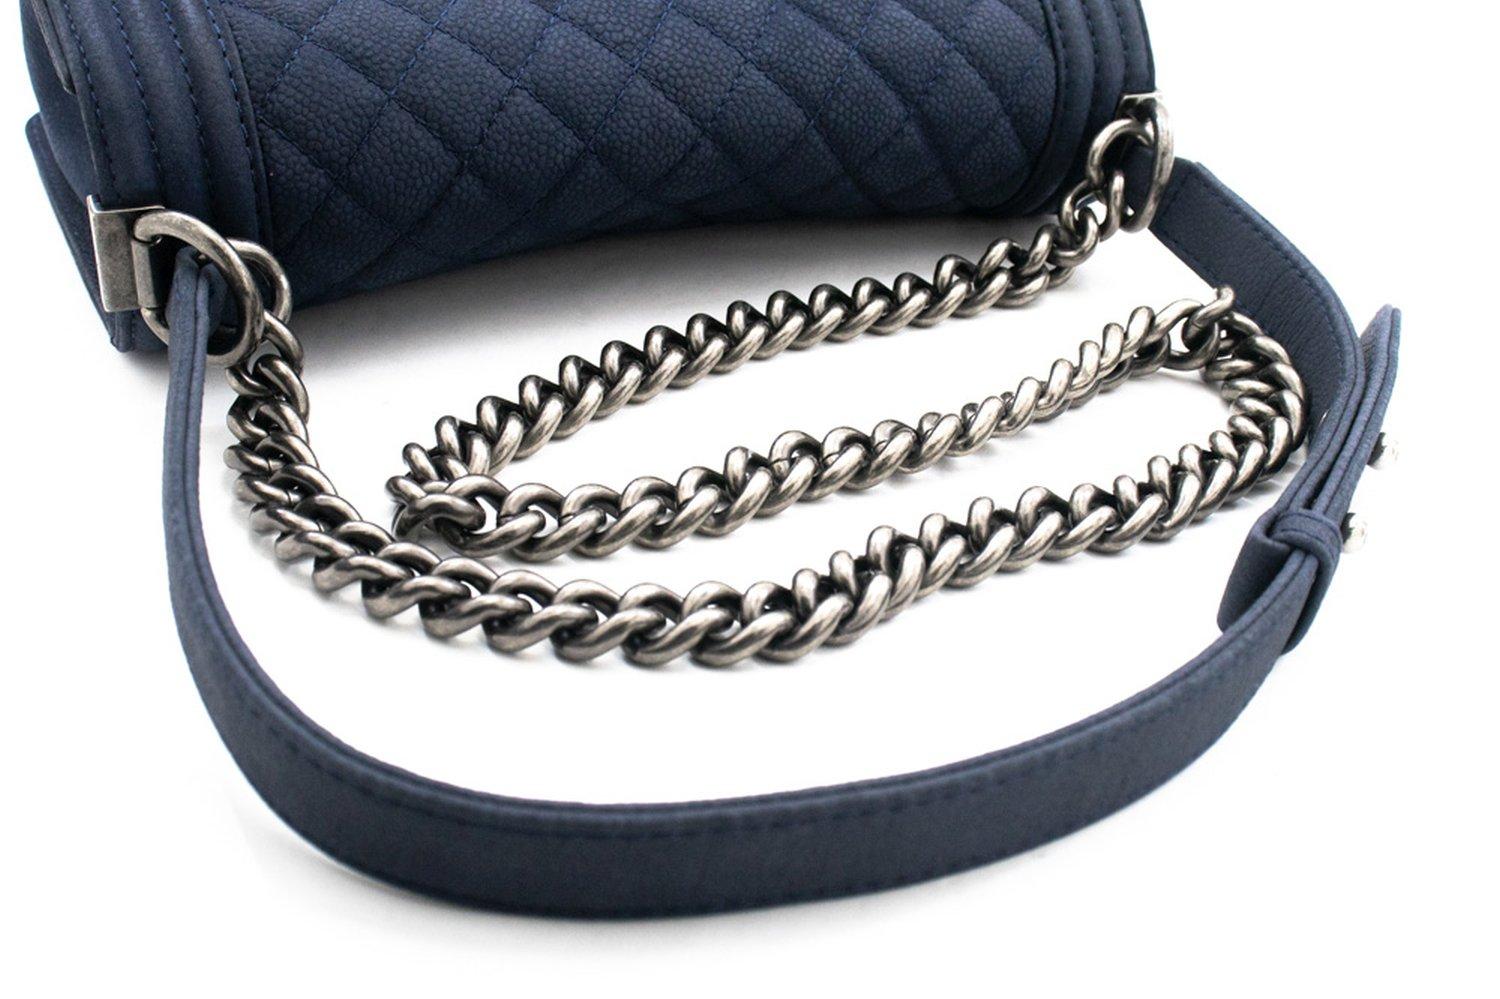 CHANEL Boy Chain Shoulder Bag Navy Flap Quilted Caviar Grained 9